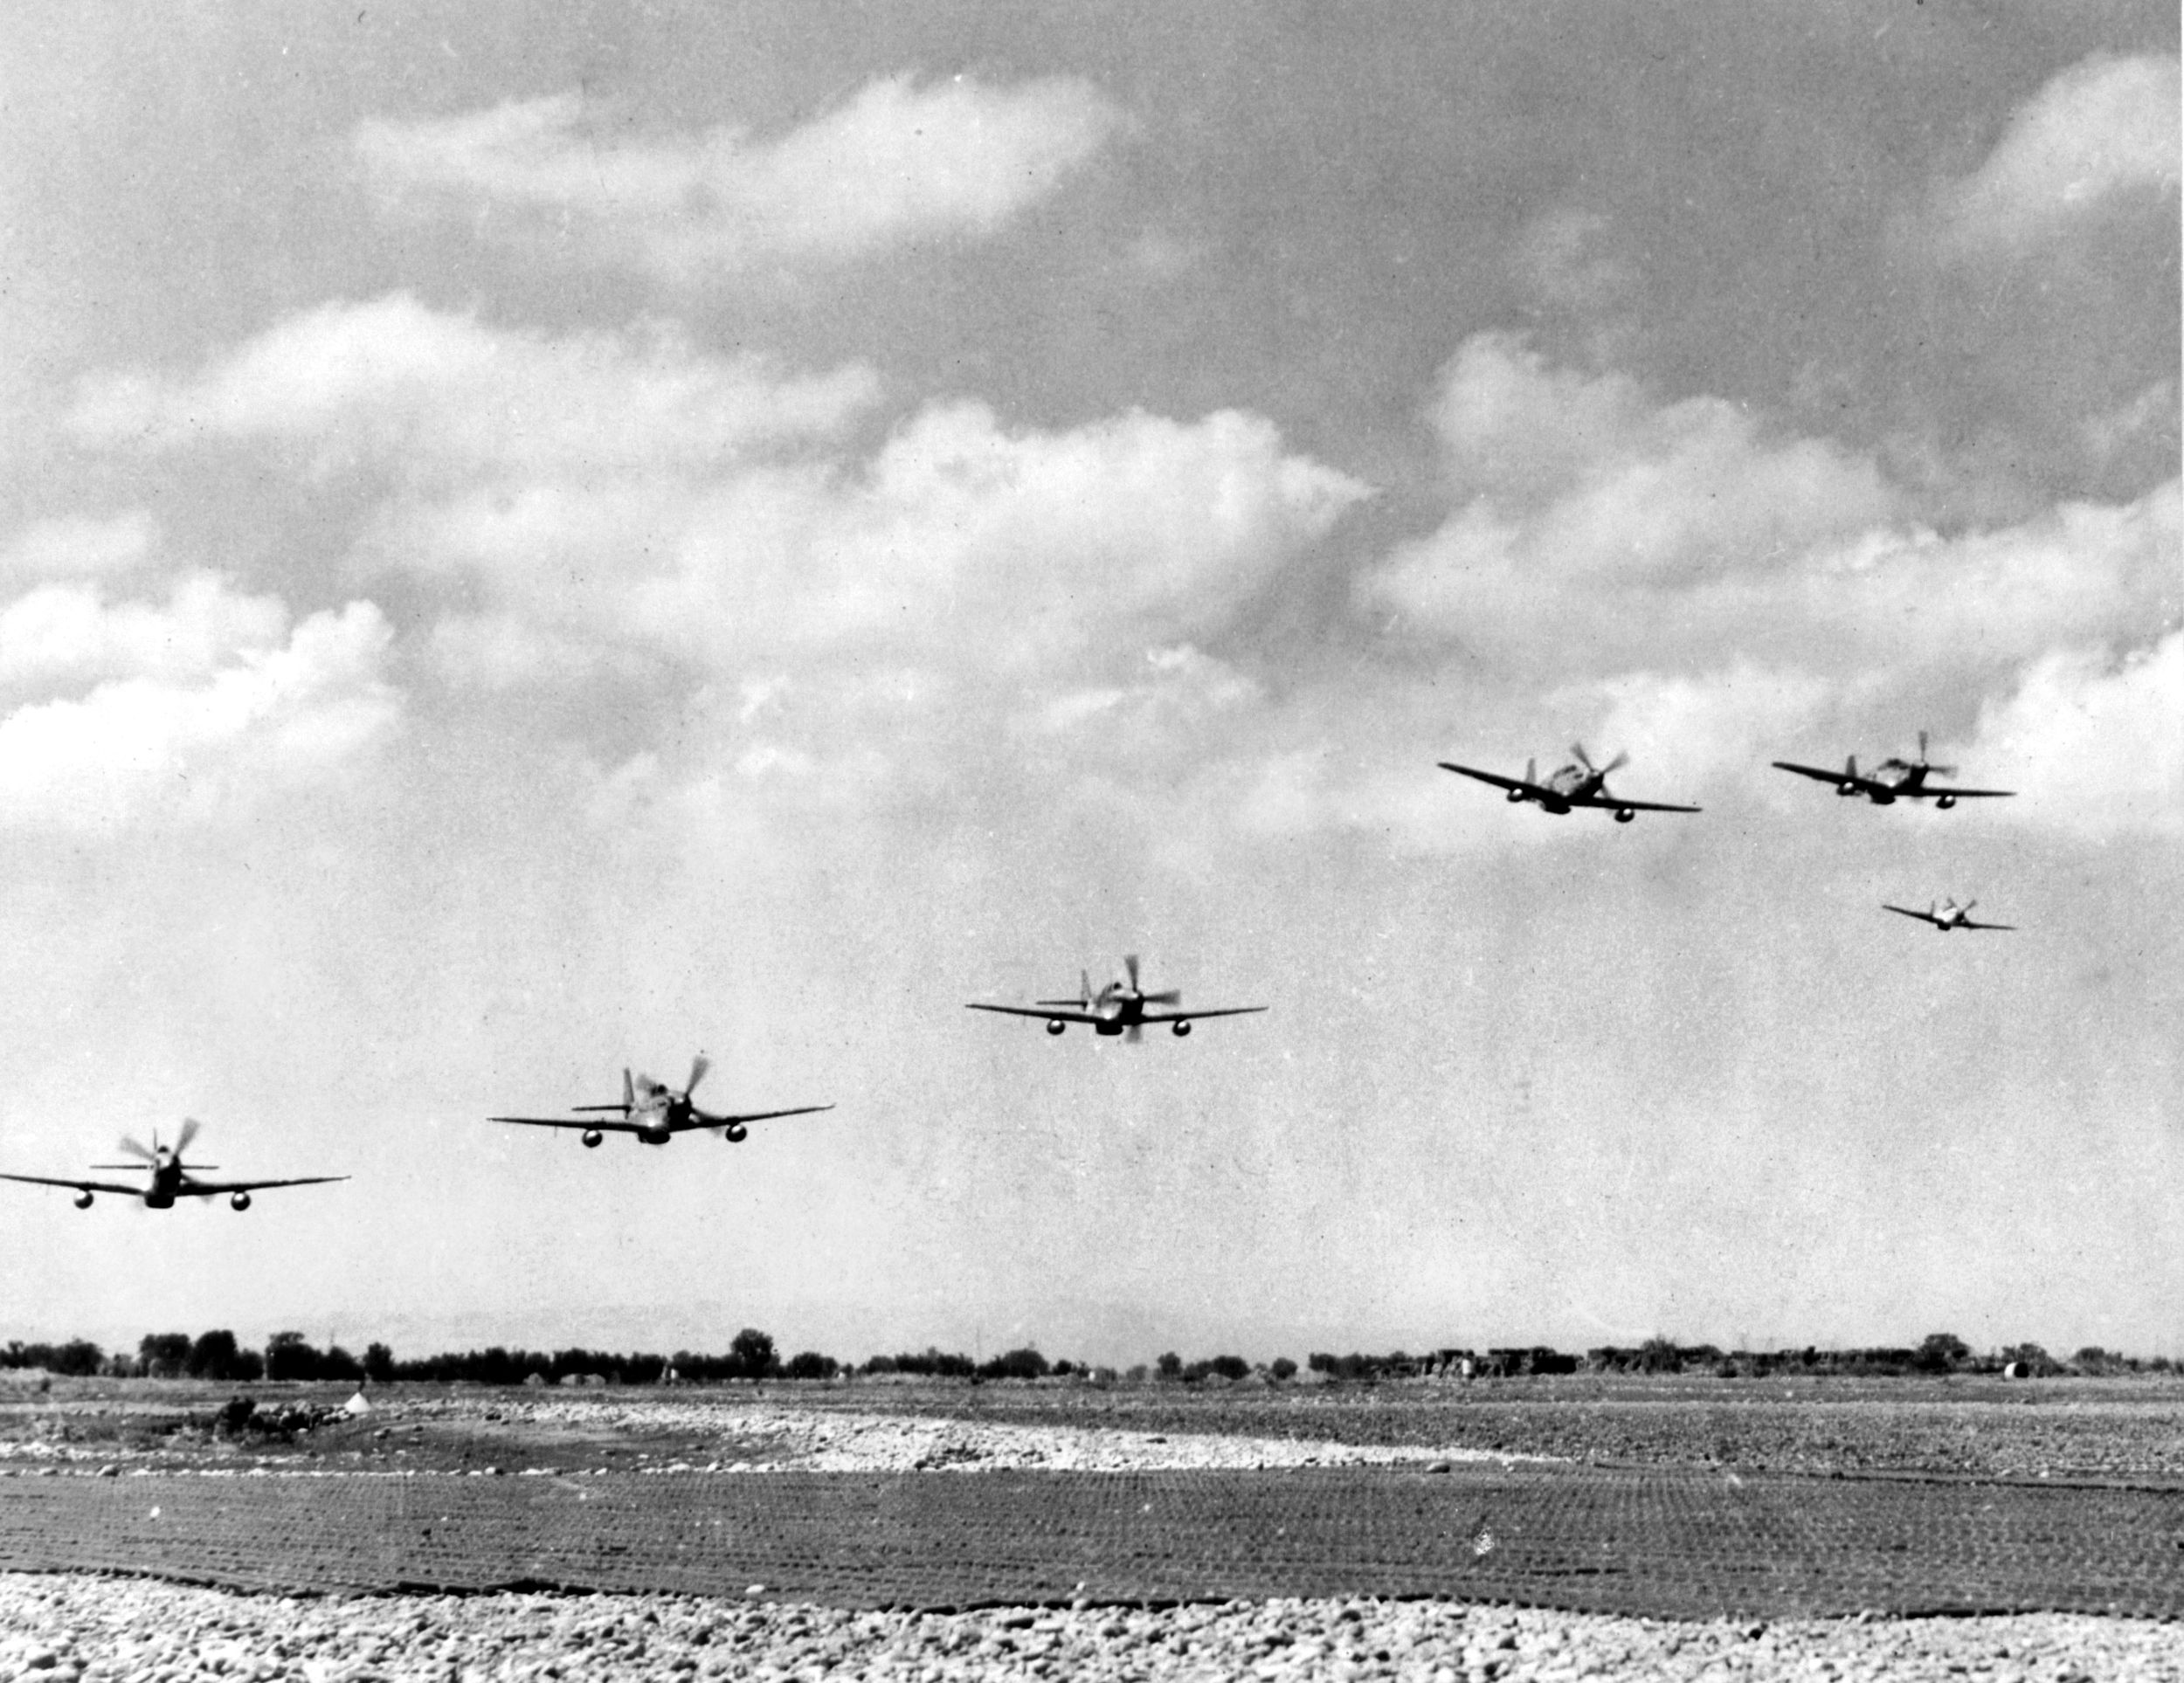 Equipped with wing tanks for a long-range mission over Germany, P-51 Mustangs of the 332nd Fighter Group buzz their base at Ramitelli, Italy.